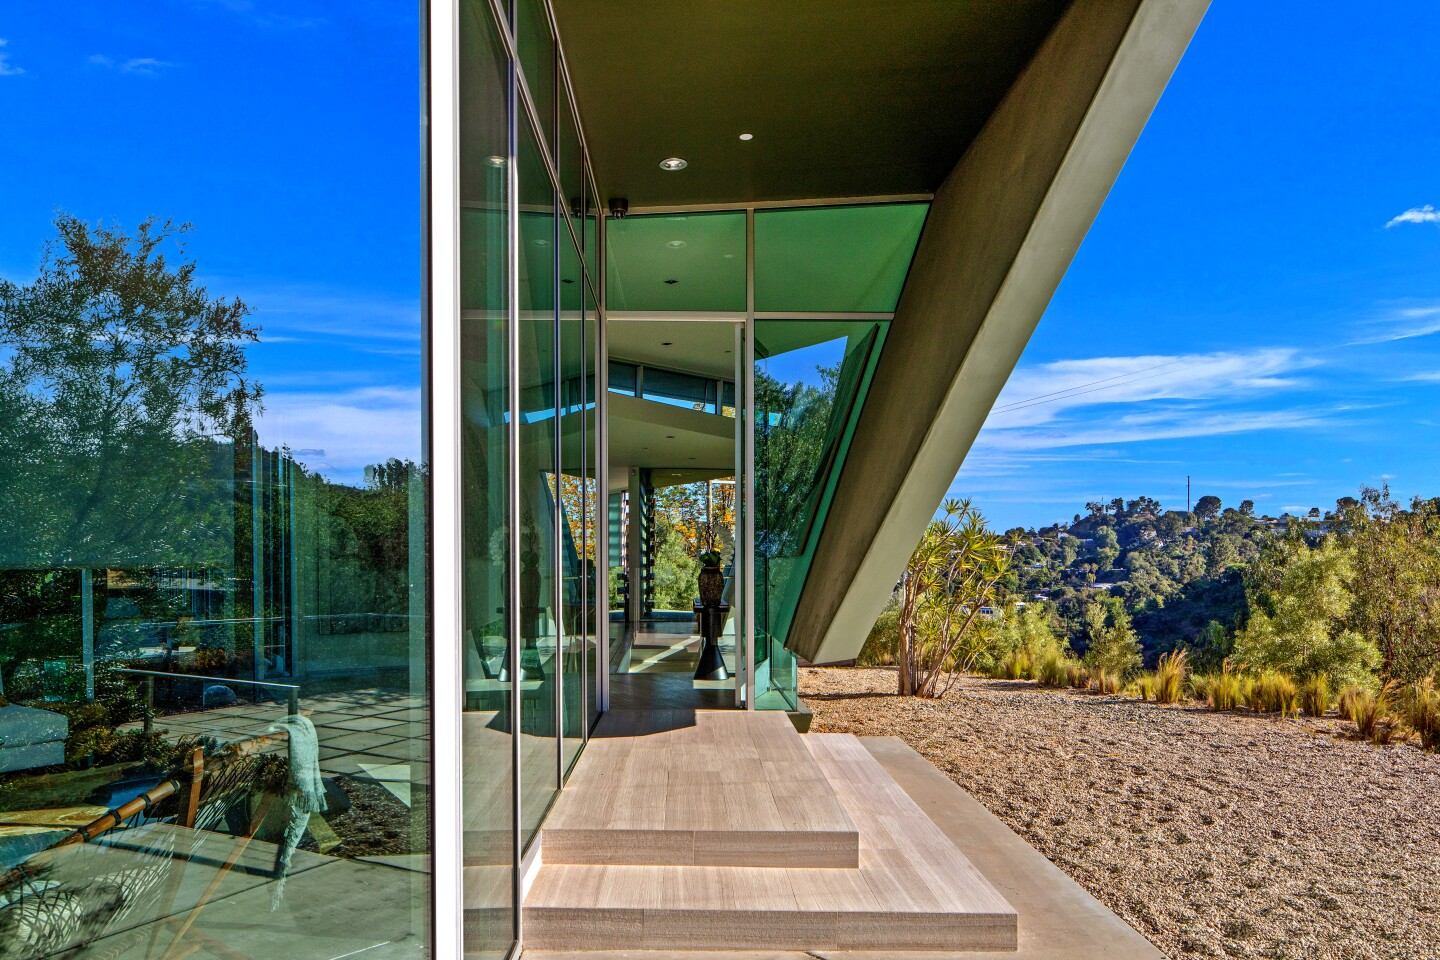 The dramatic Hollywood Hills home of musician Pharrell was designed by Hagy Belzberg and completed in 2007. Set atop a ridge, the modern showplace features an open-concept floor plan, walls of glass and a minimalist-vibe kitchen. A suspended chrome fireplace commands attention in the living room, which is bordered on all sides by floor-to-ceiling windows.